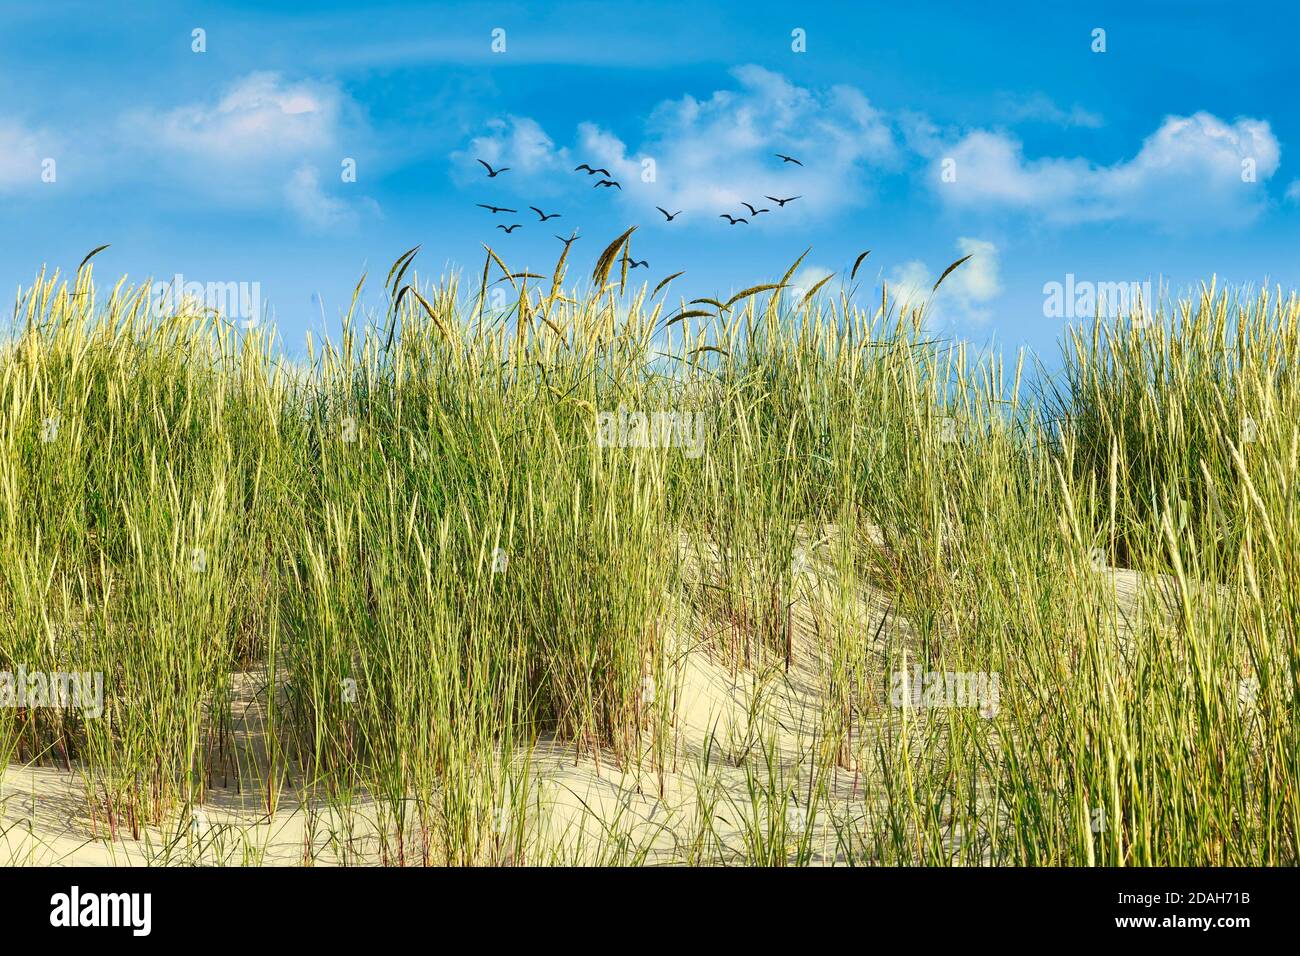 Beach grass growing on sand dune and birds in sky in Langeoog Germany. Stock Photo